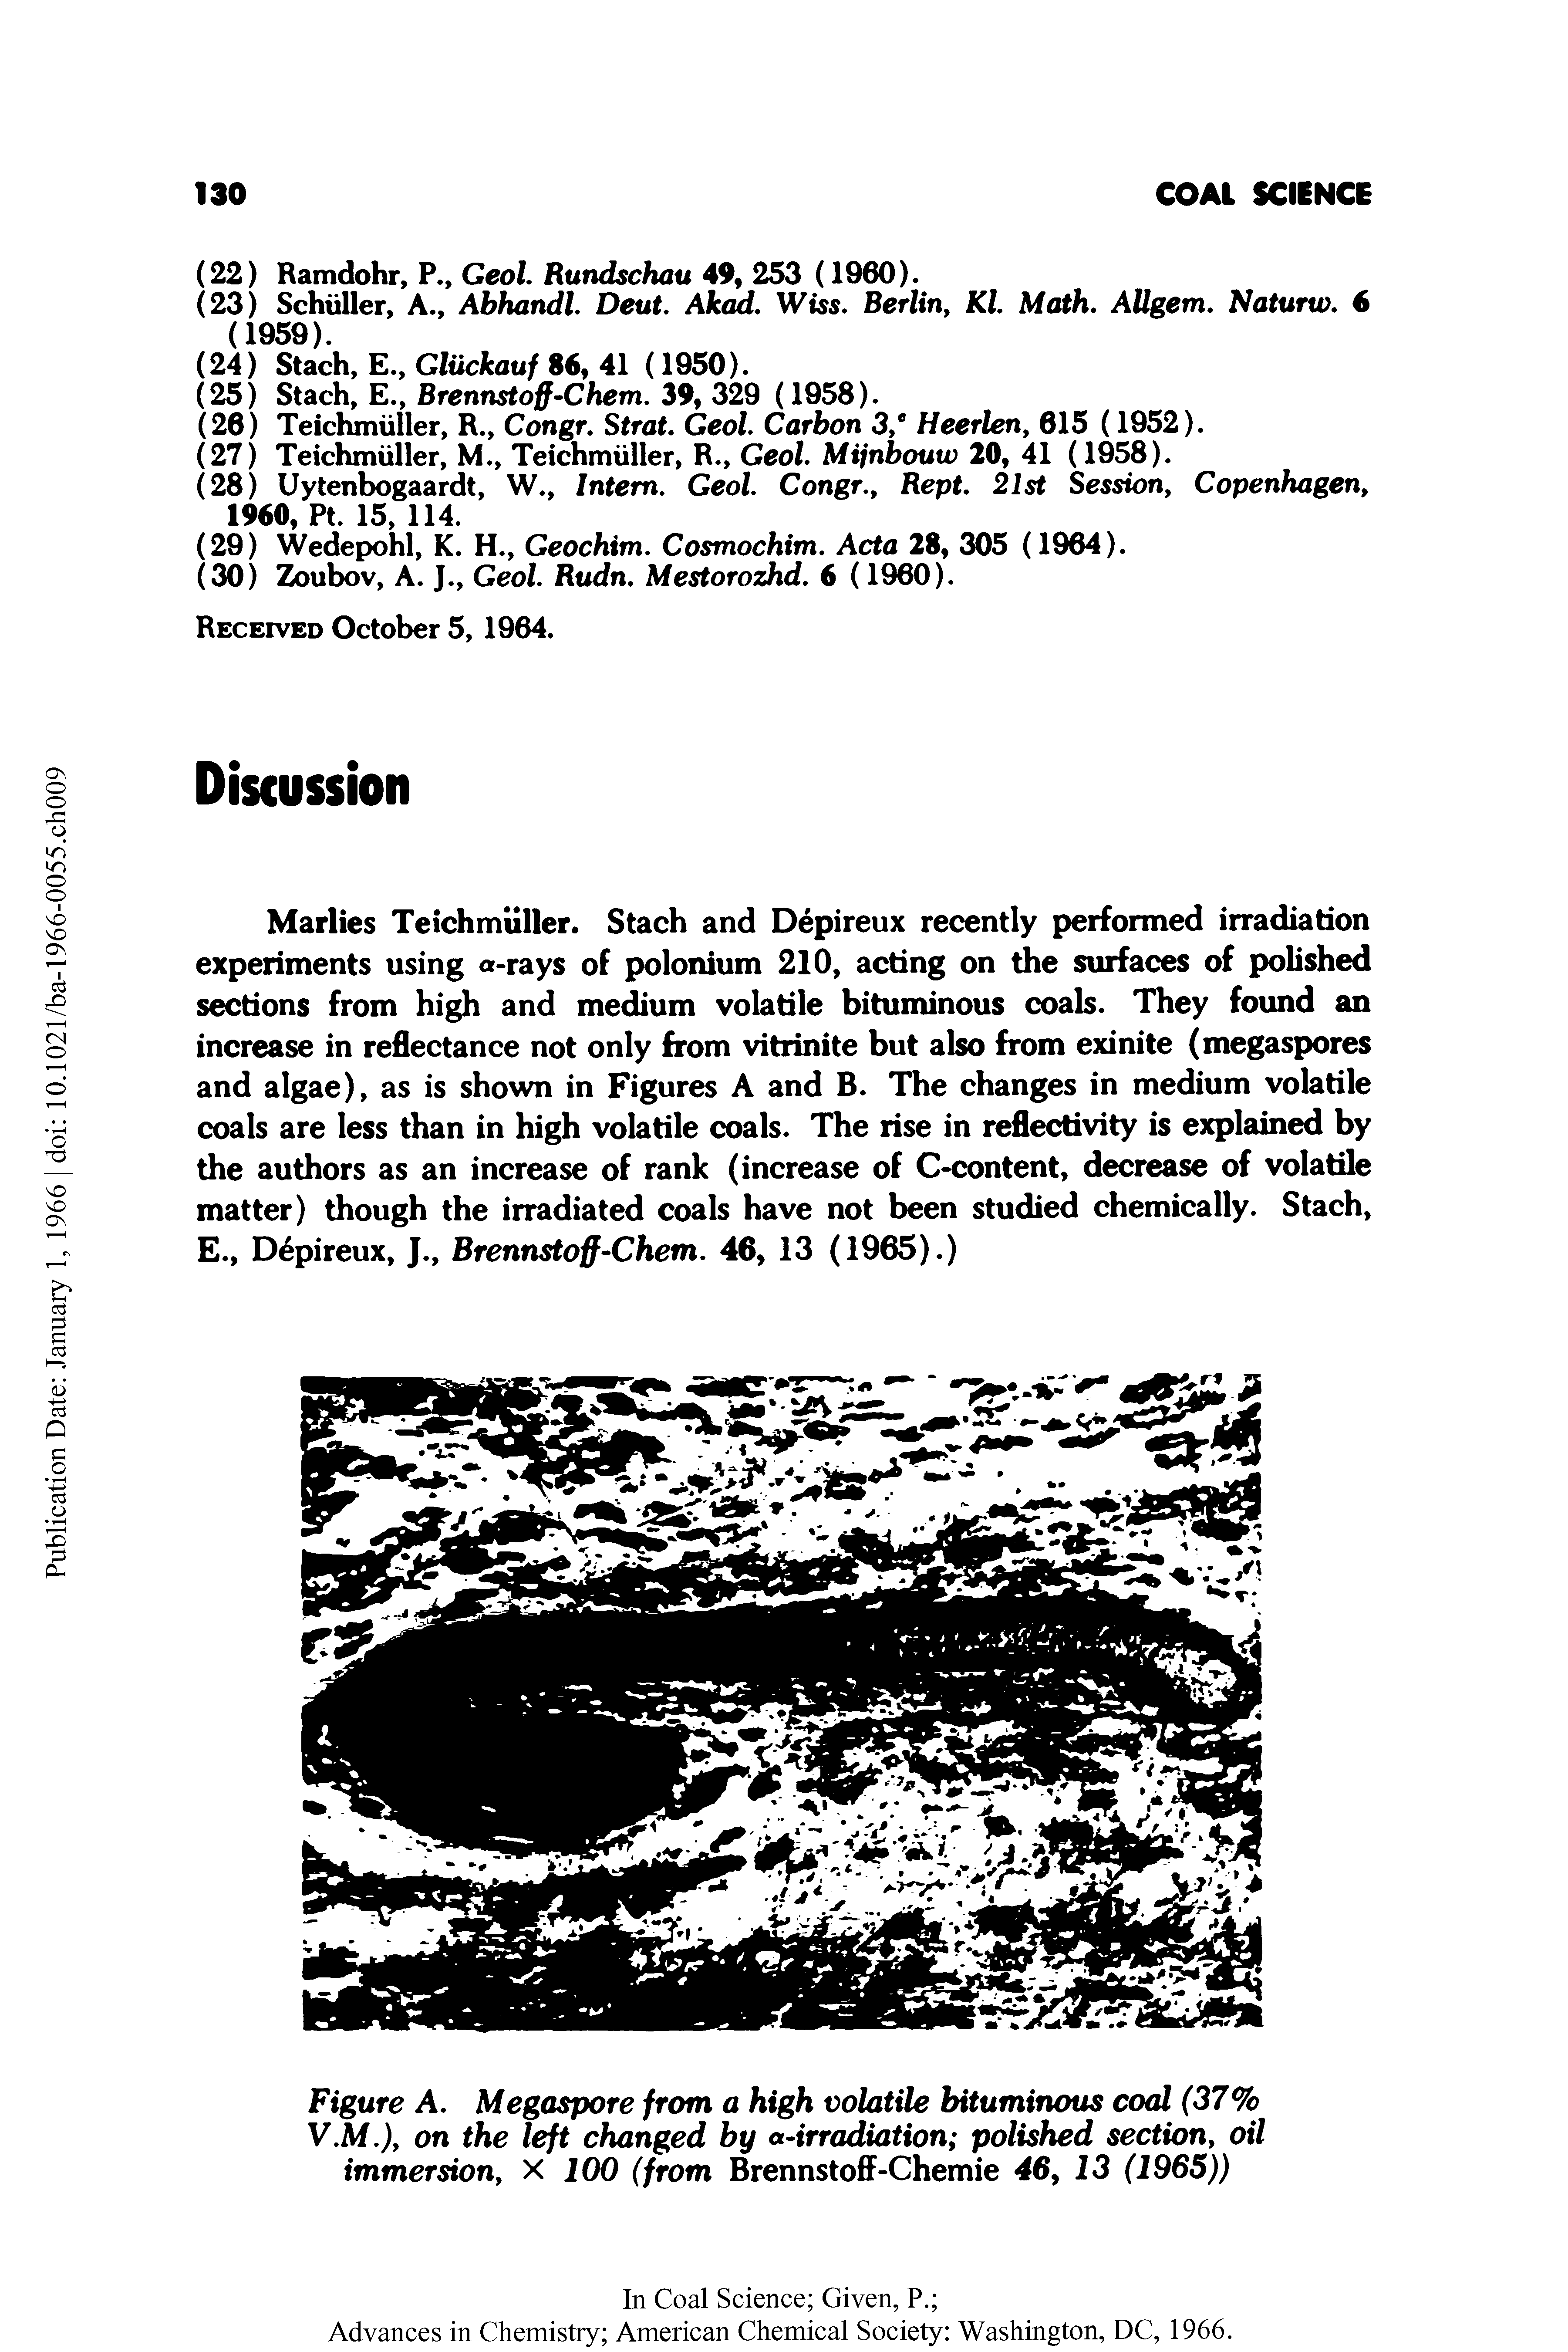 Figure A. Megaspore from a high volatile bituminous coal (37% V.M.), on the left changed by a-irradiation polished section, oil immersion, X 100 (from Brennstoff-Chemie 46, 13 (1965))...